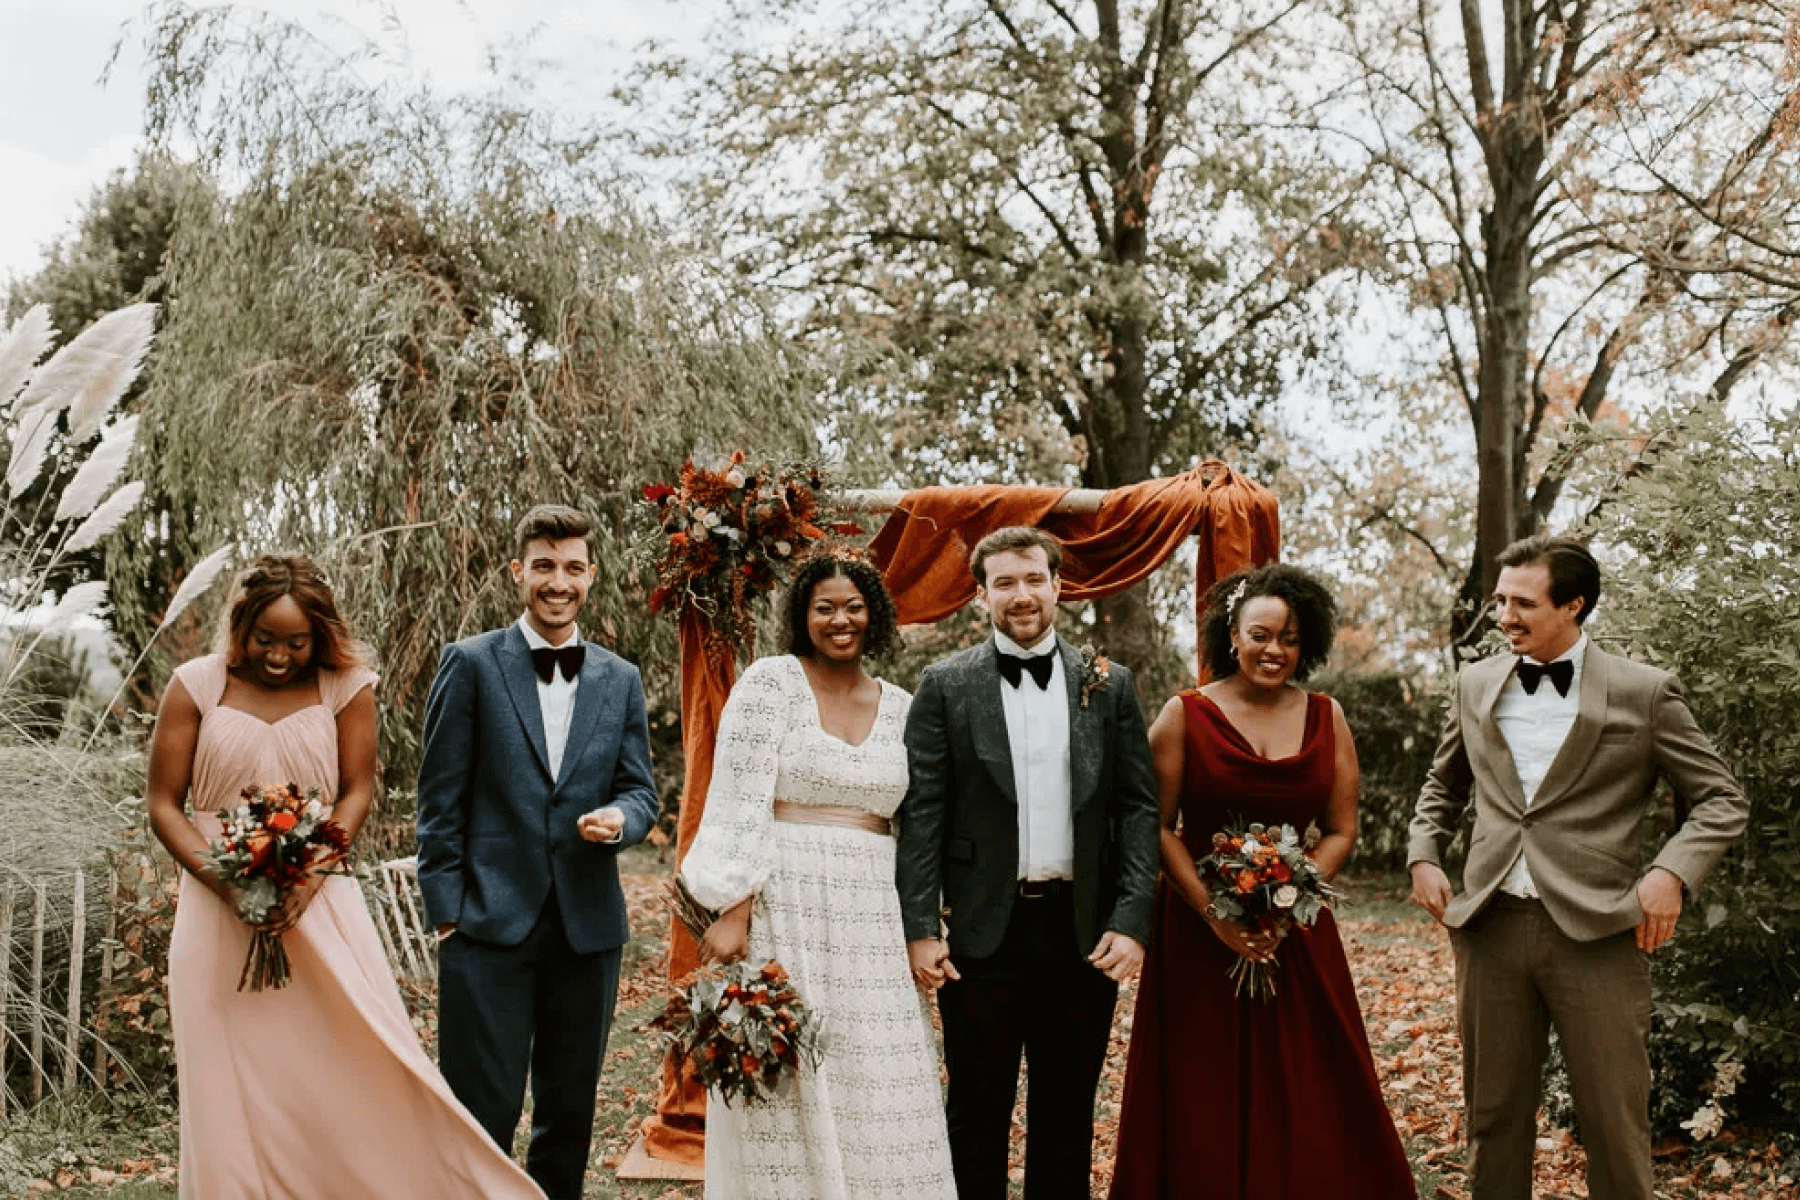 Wedding themes for fall